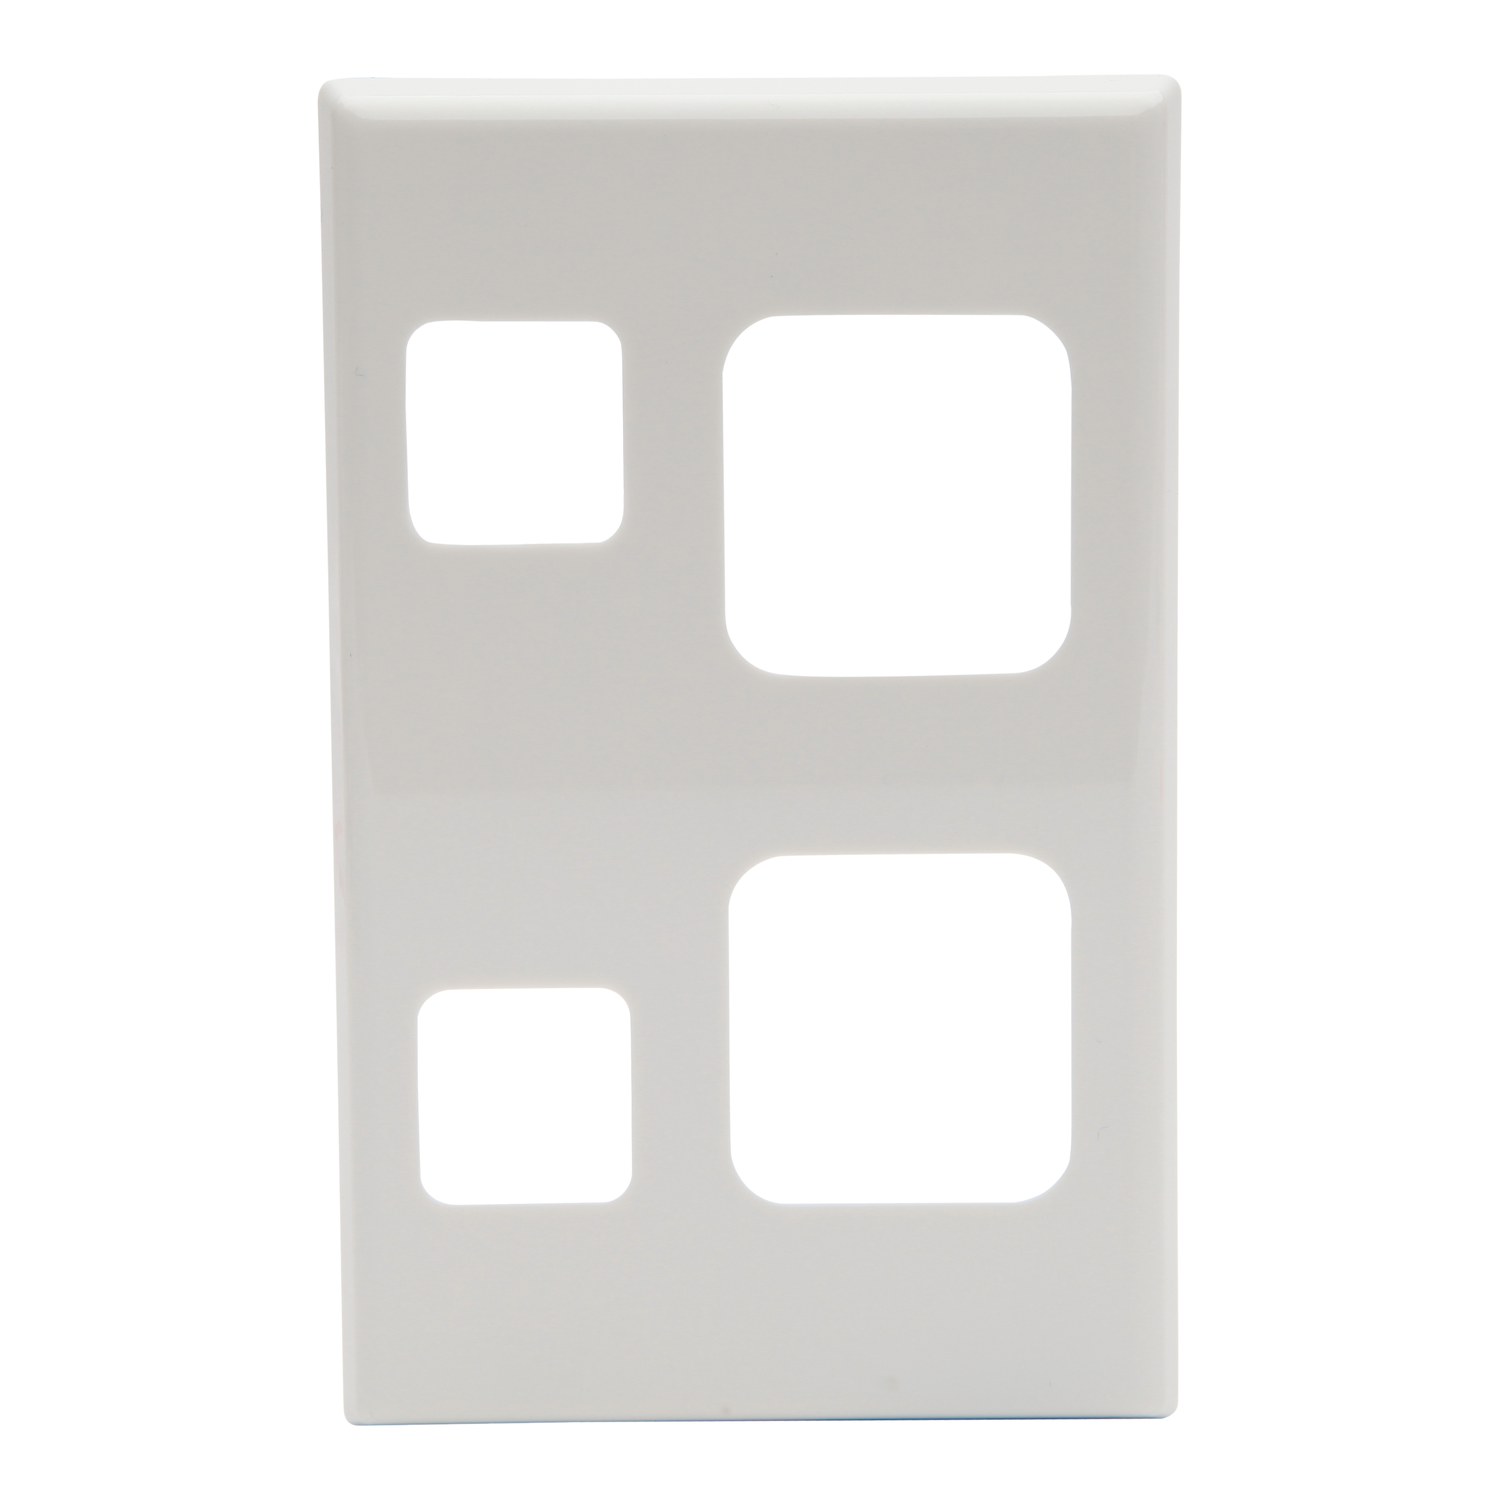 PDL 600 Series - Cover Plate Double Switched Socket Vertical - White